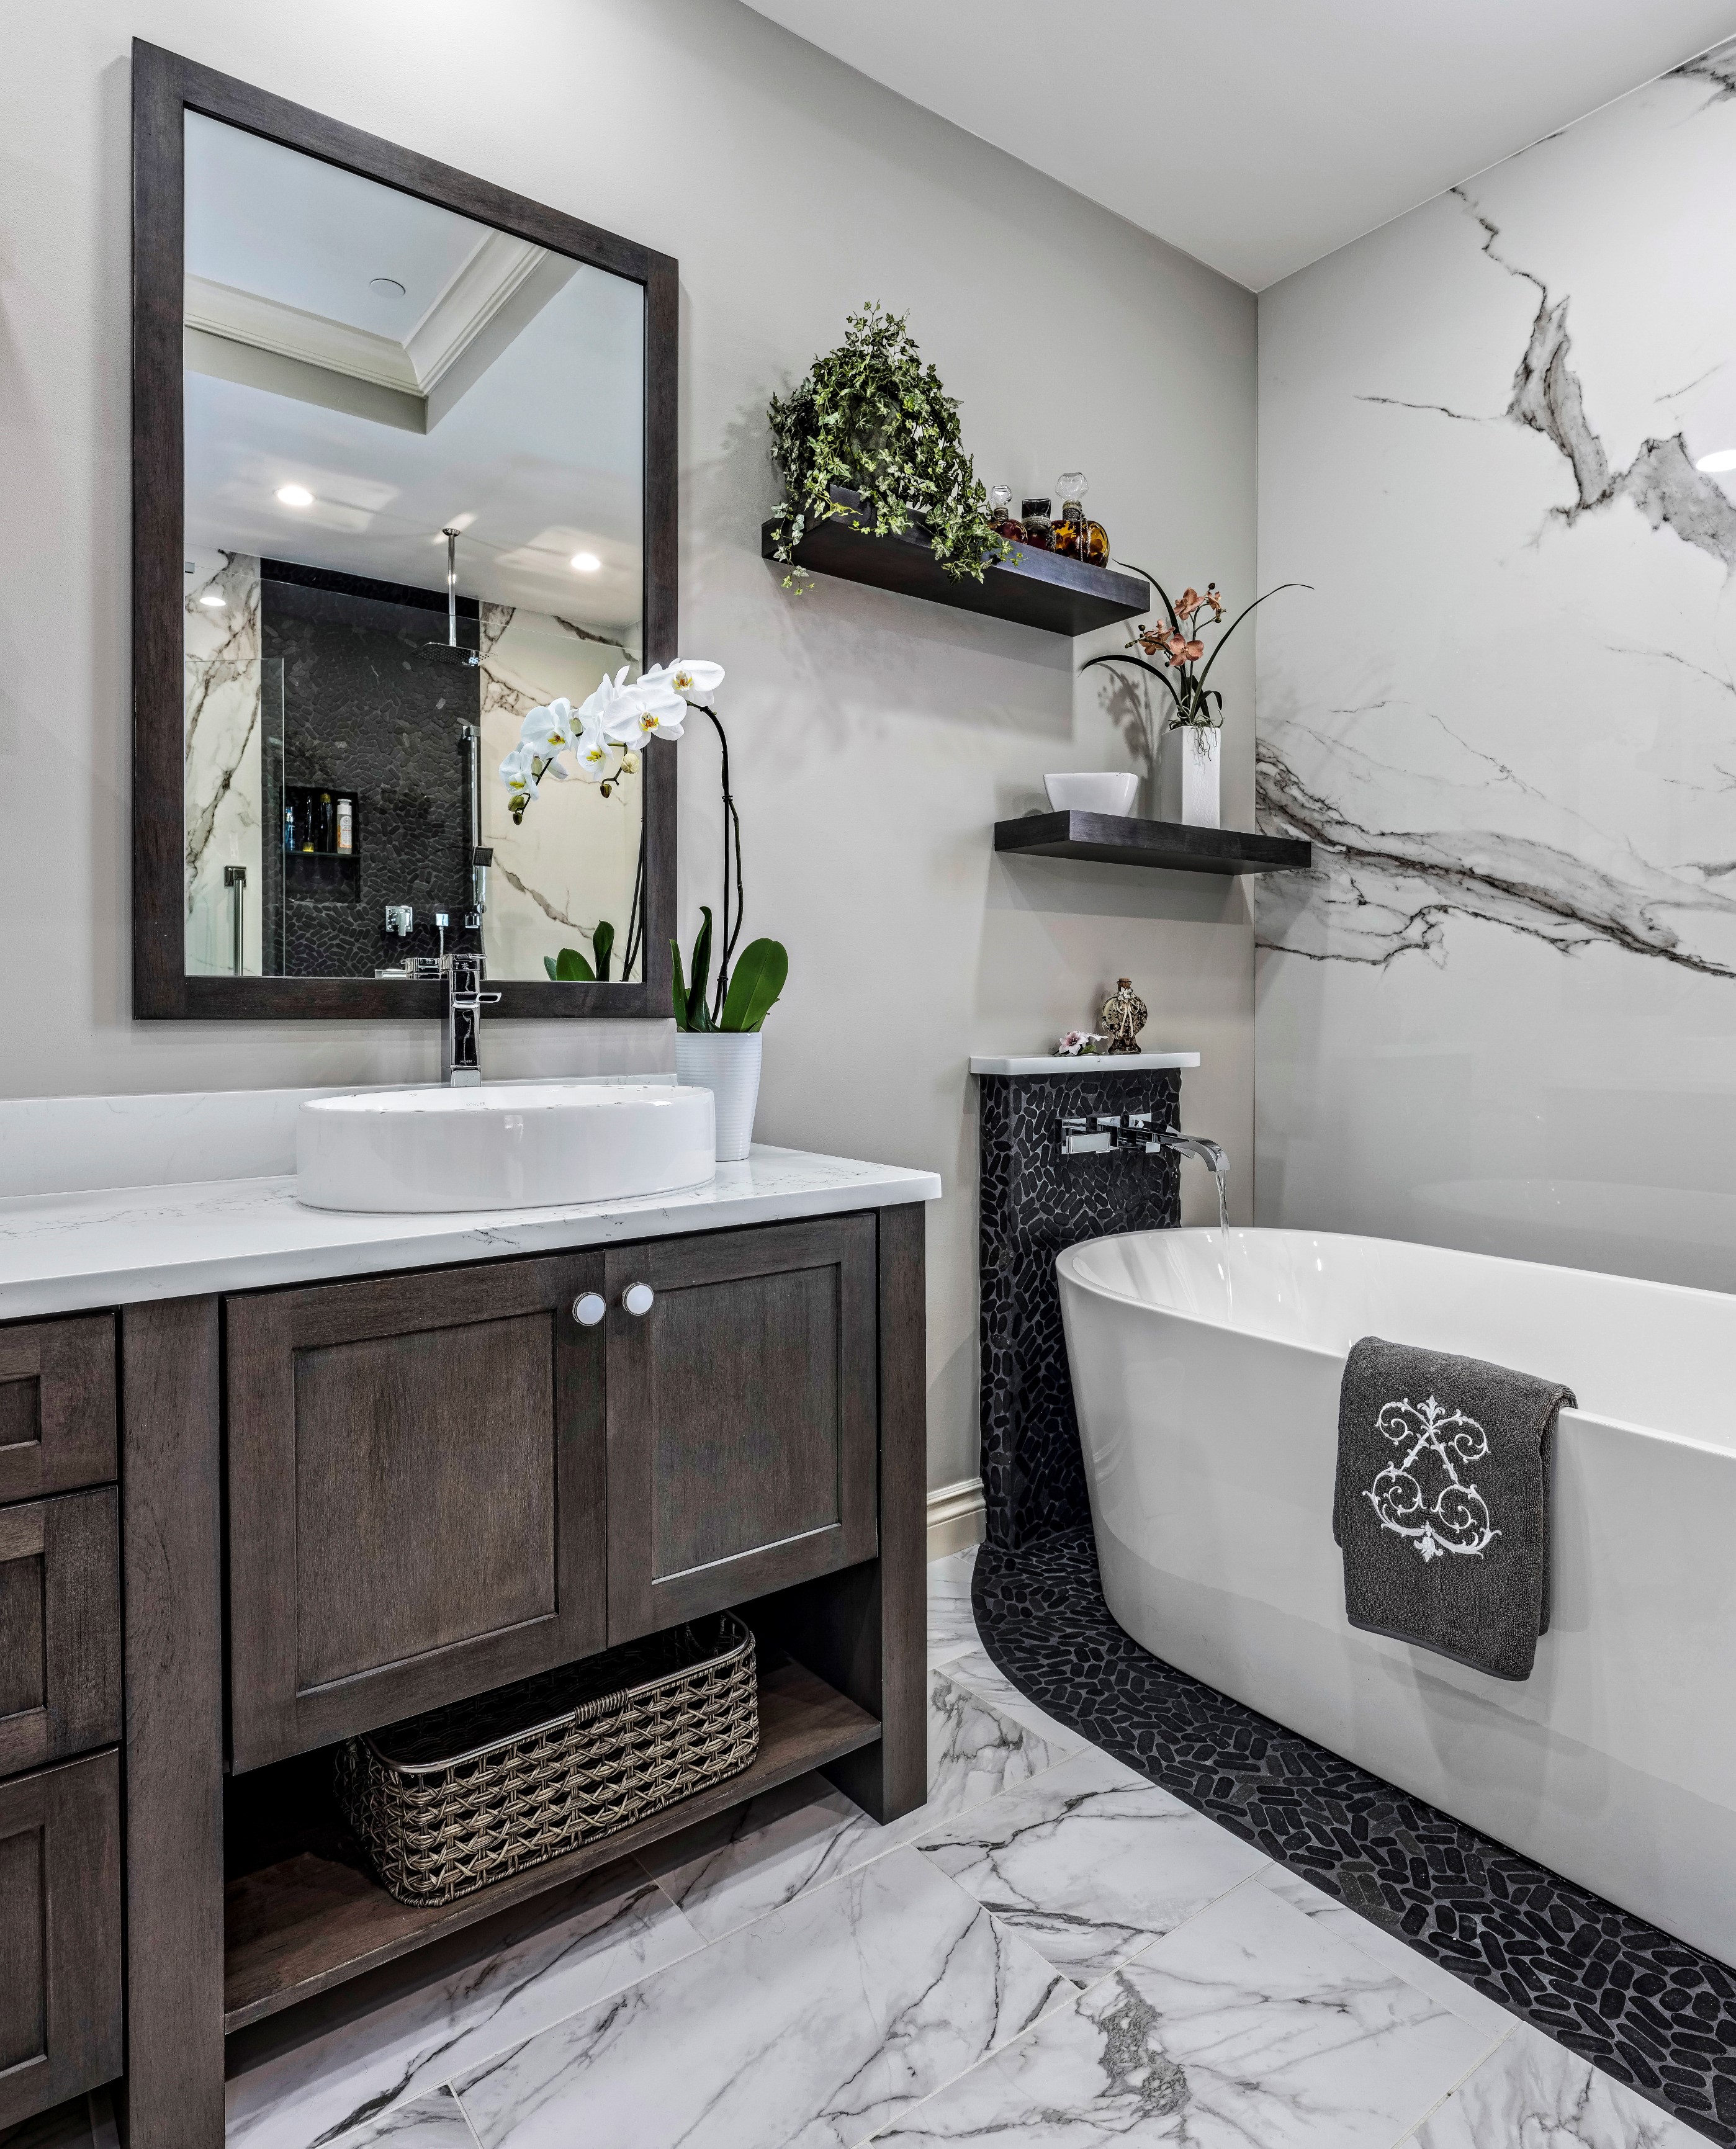 Bathroom Remodeling Typically Cost, How Much Does It Cost To Renovate A Small Bathroom